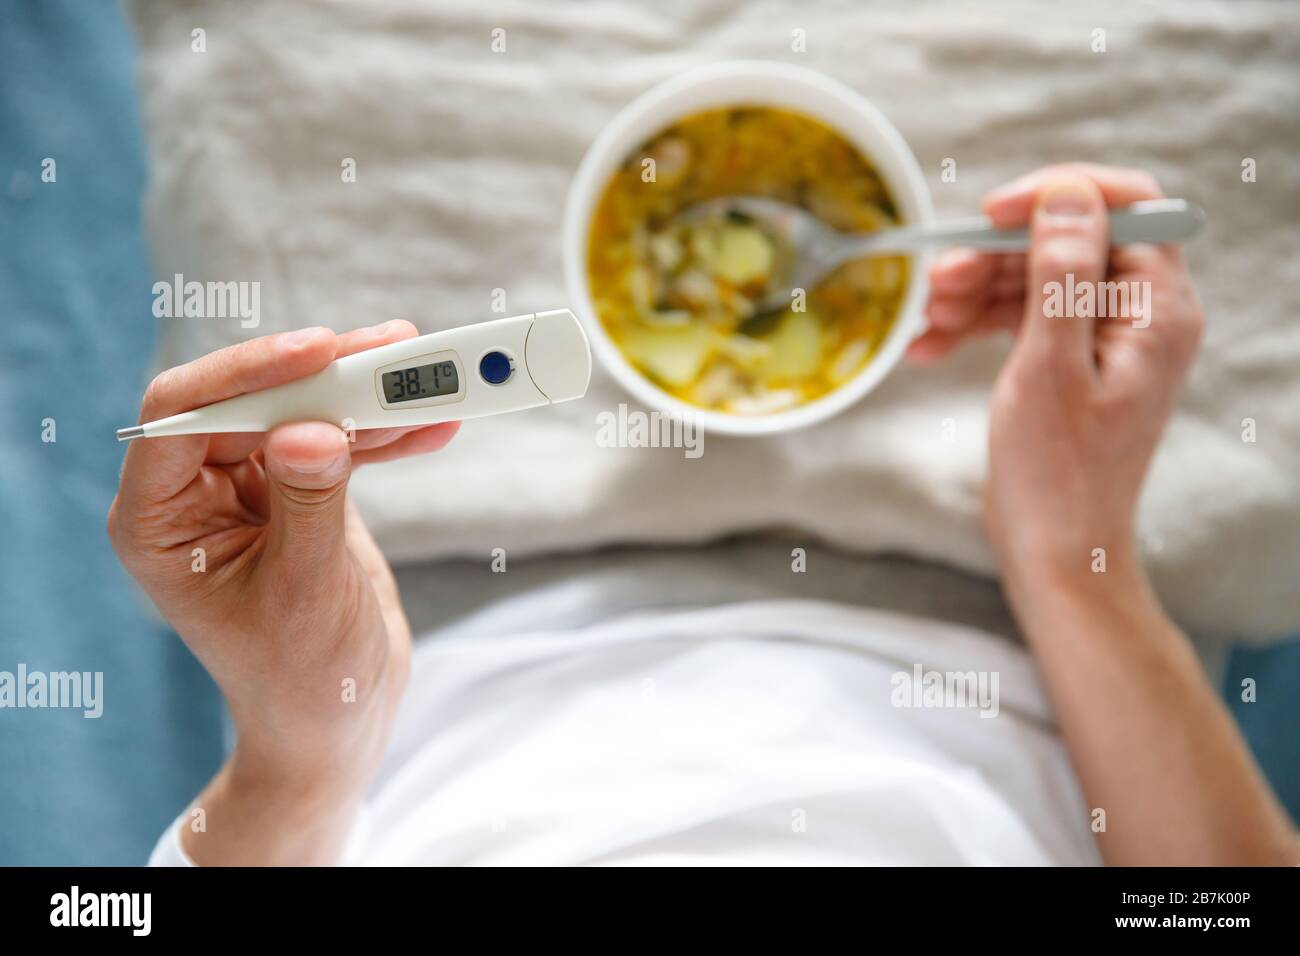 https://c8.alamy.com/comp/2B7K00P/view-from-above-diseased-male-eating-healthy-chicken-soup-to-fight-the-flu-sickness-holding-digital-thermometer-in-hand-soft-focus-2B7K00P.jpg